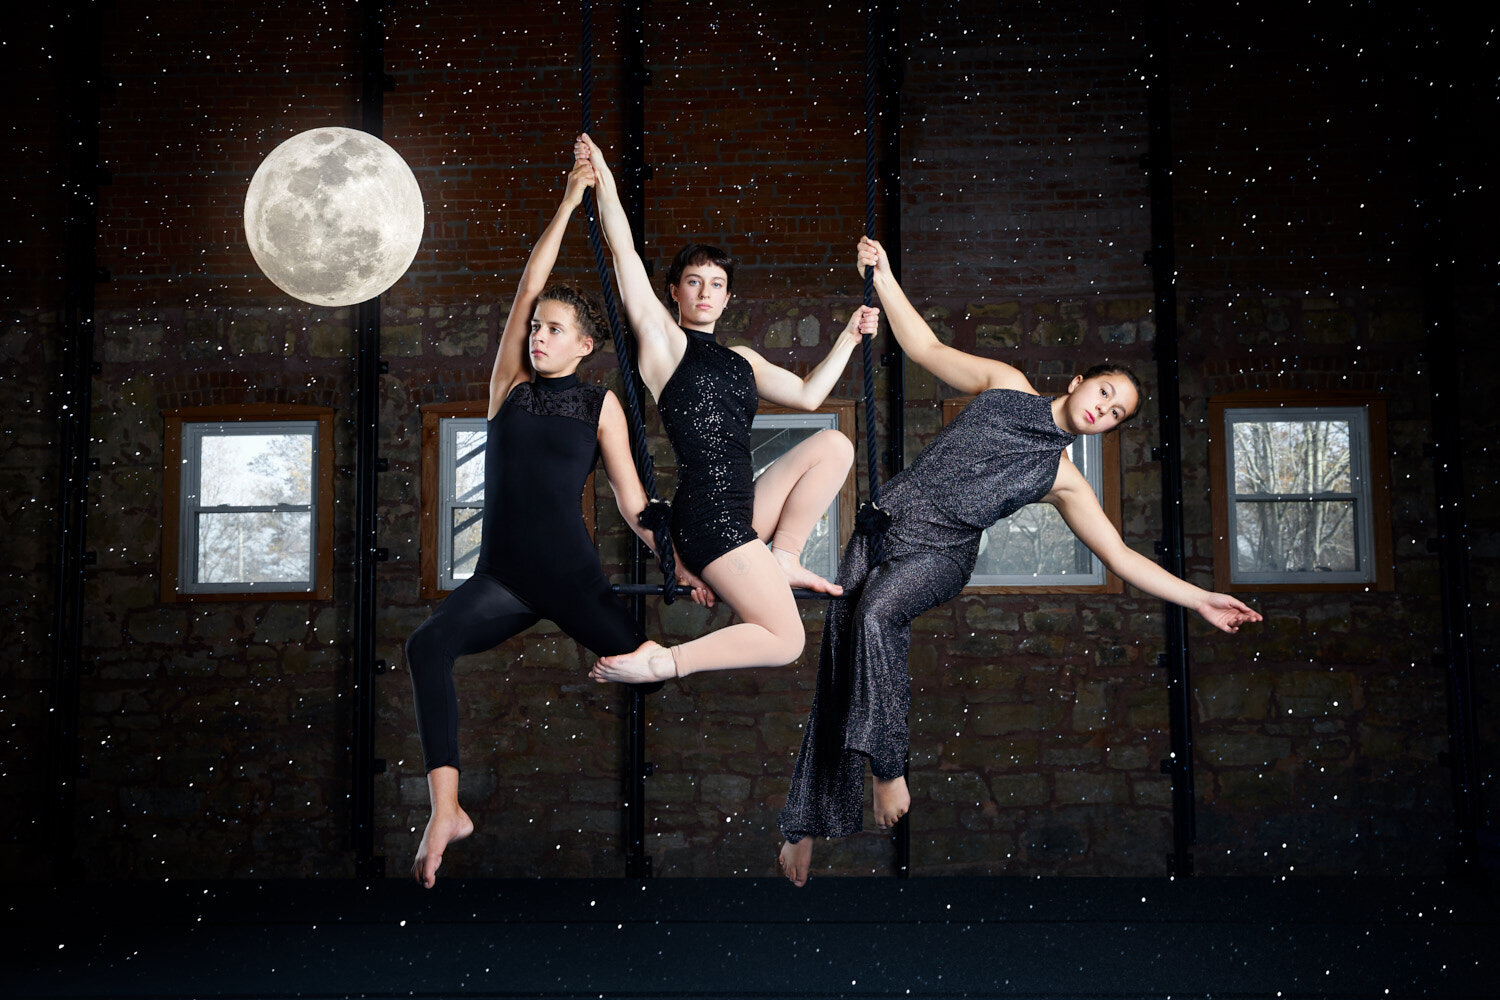 entertainer photography: arial performers posed on trapeze with full moon and stars